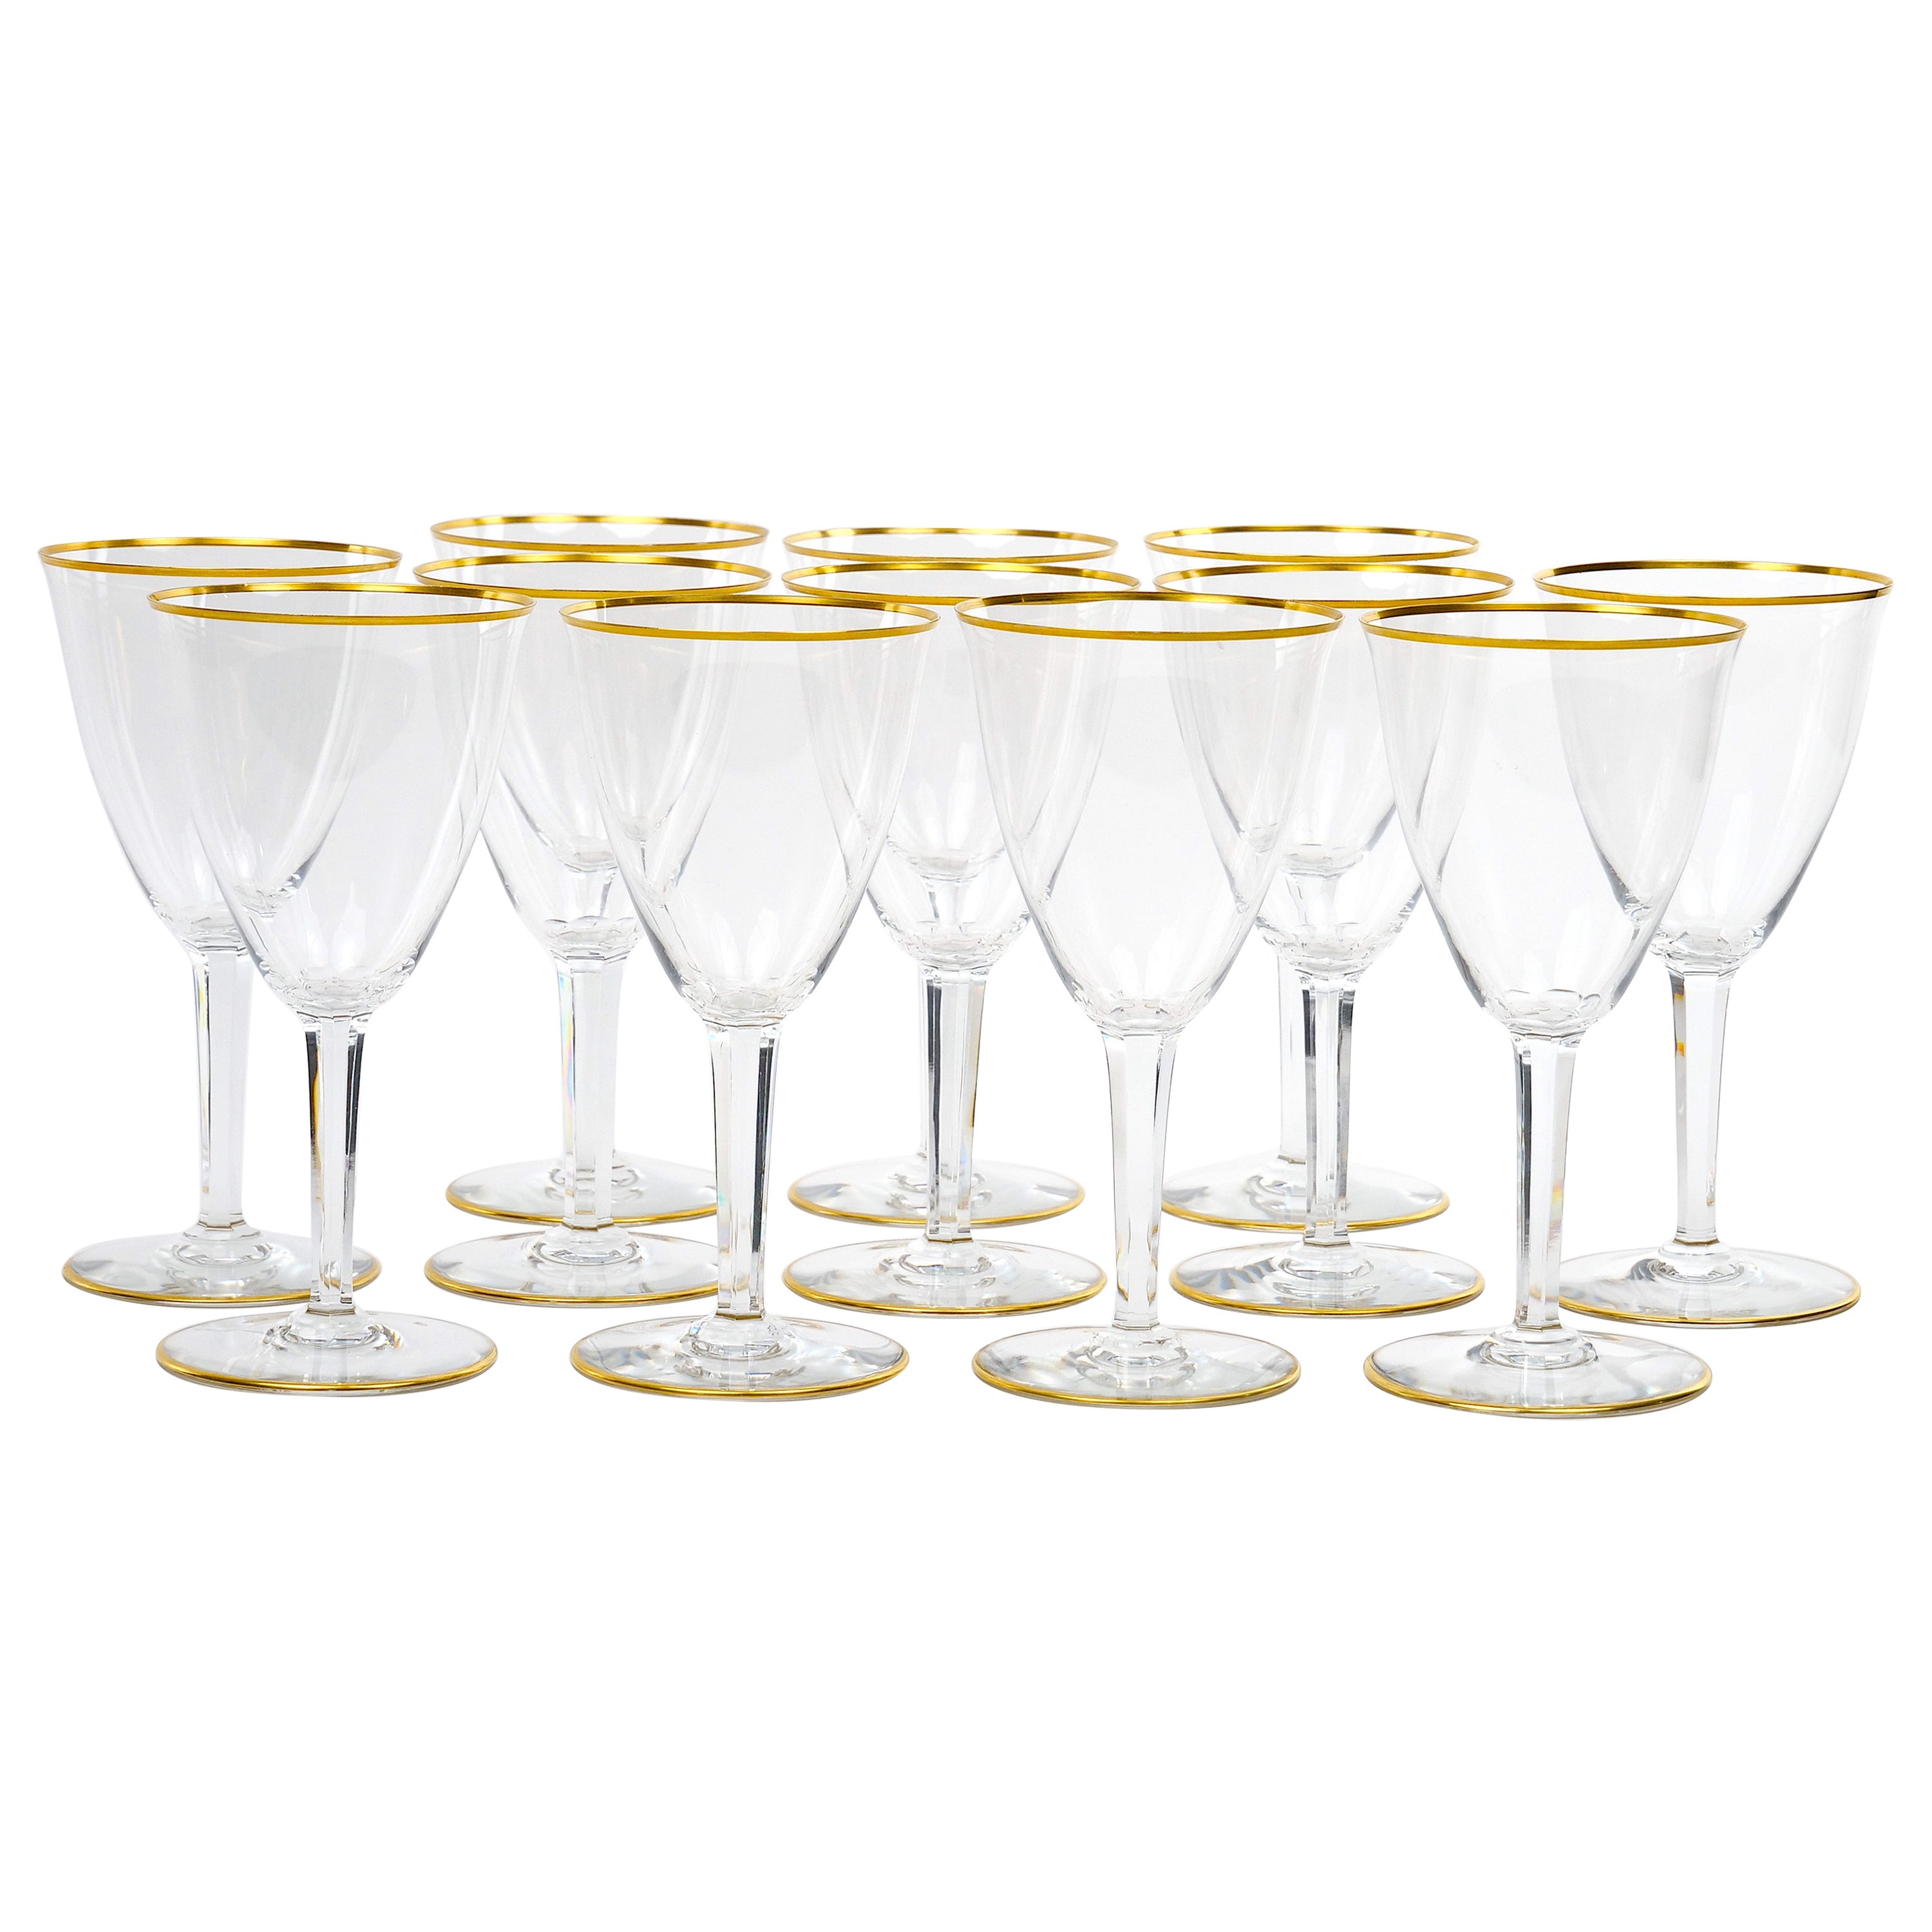 French Baccarat Crystal Tableware Wine / Water Service / 12 People For Sale